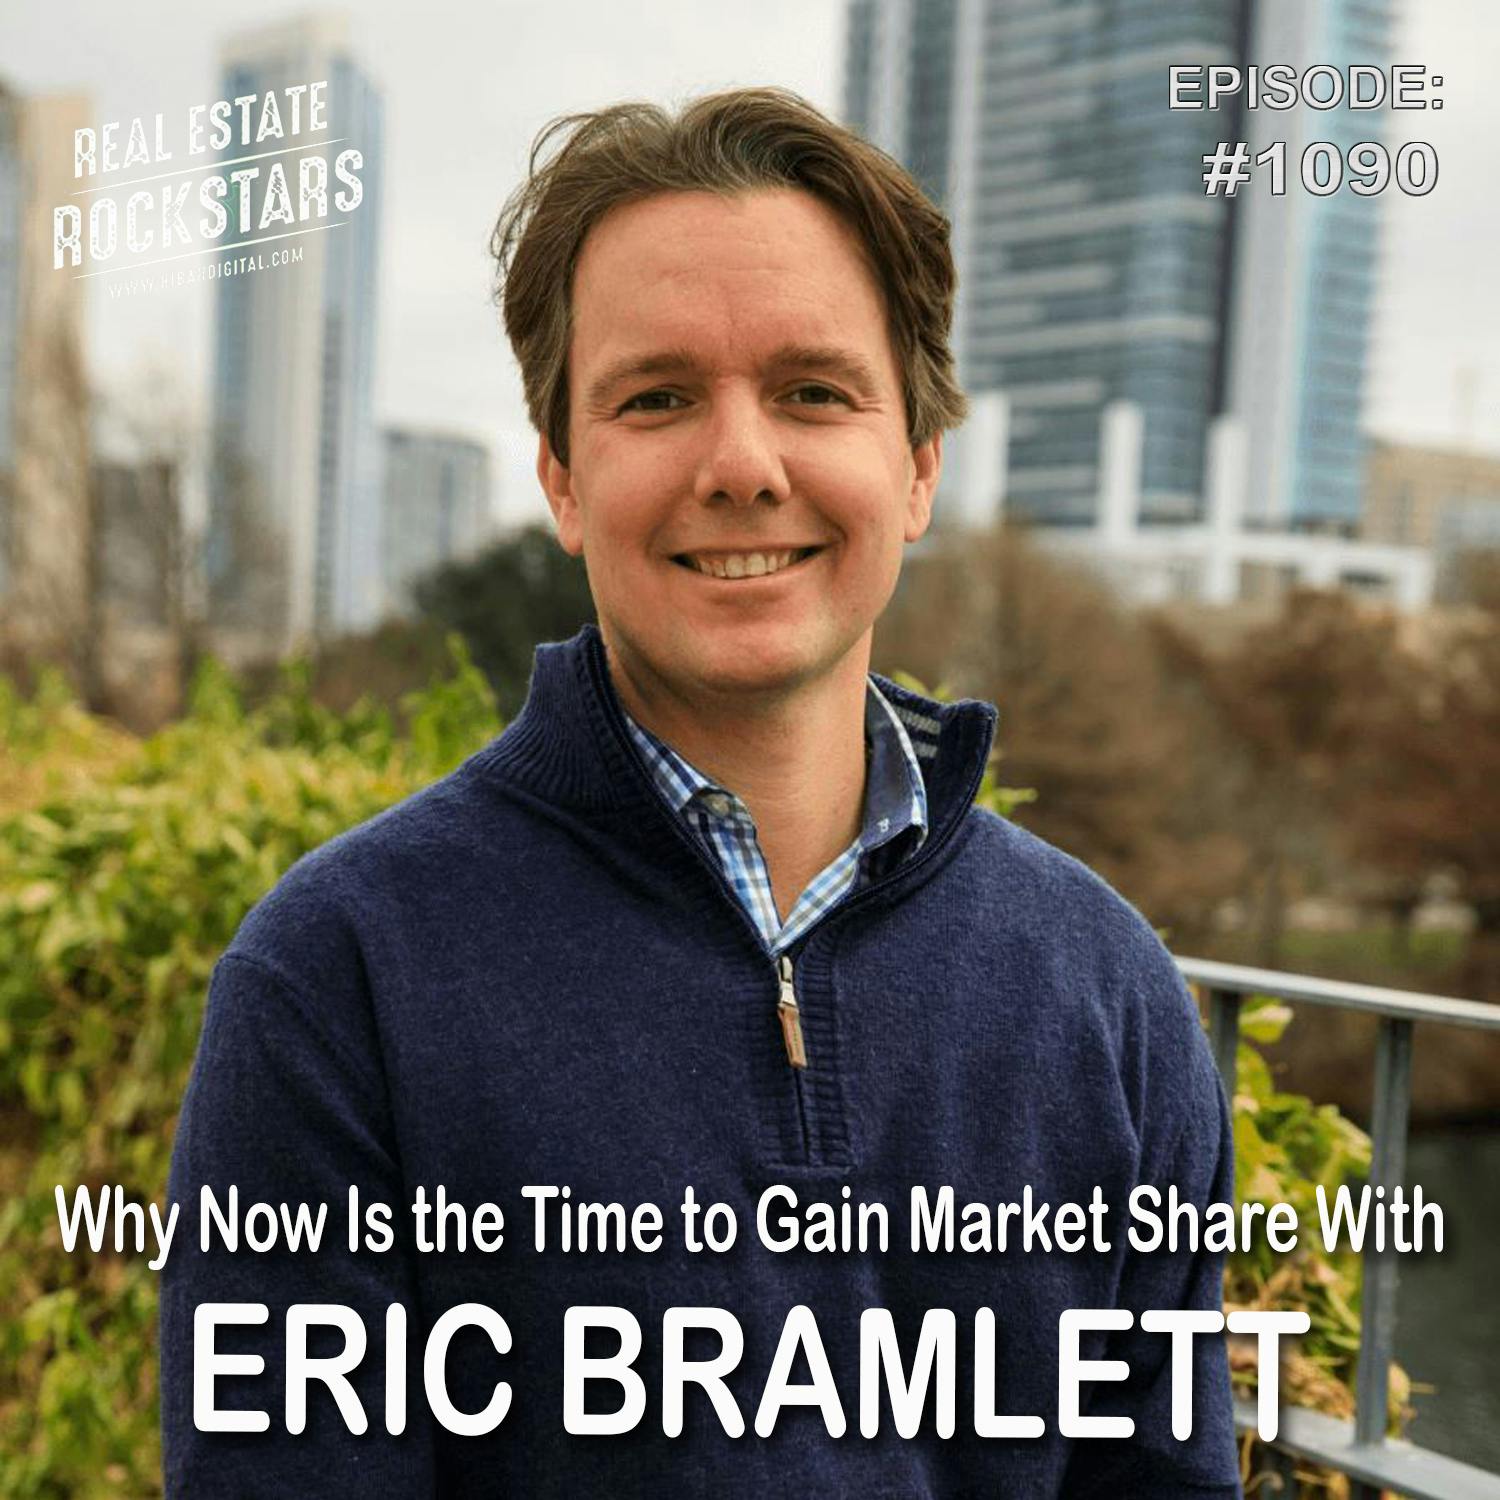 1090: Why Now Is the Time to Gain Market Share With Eric Bramlett